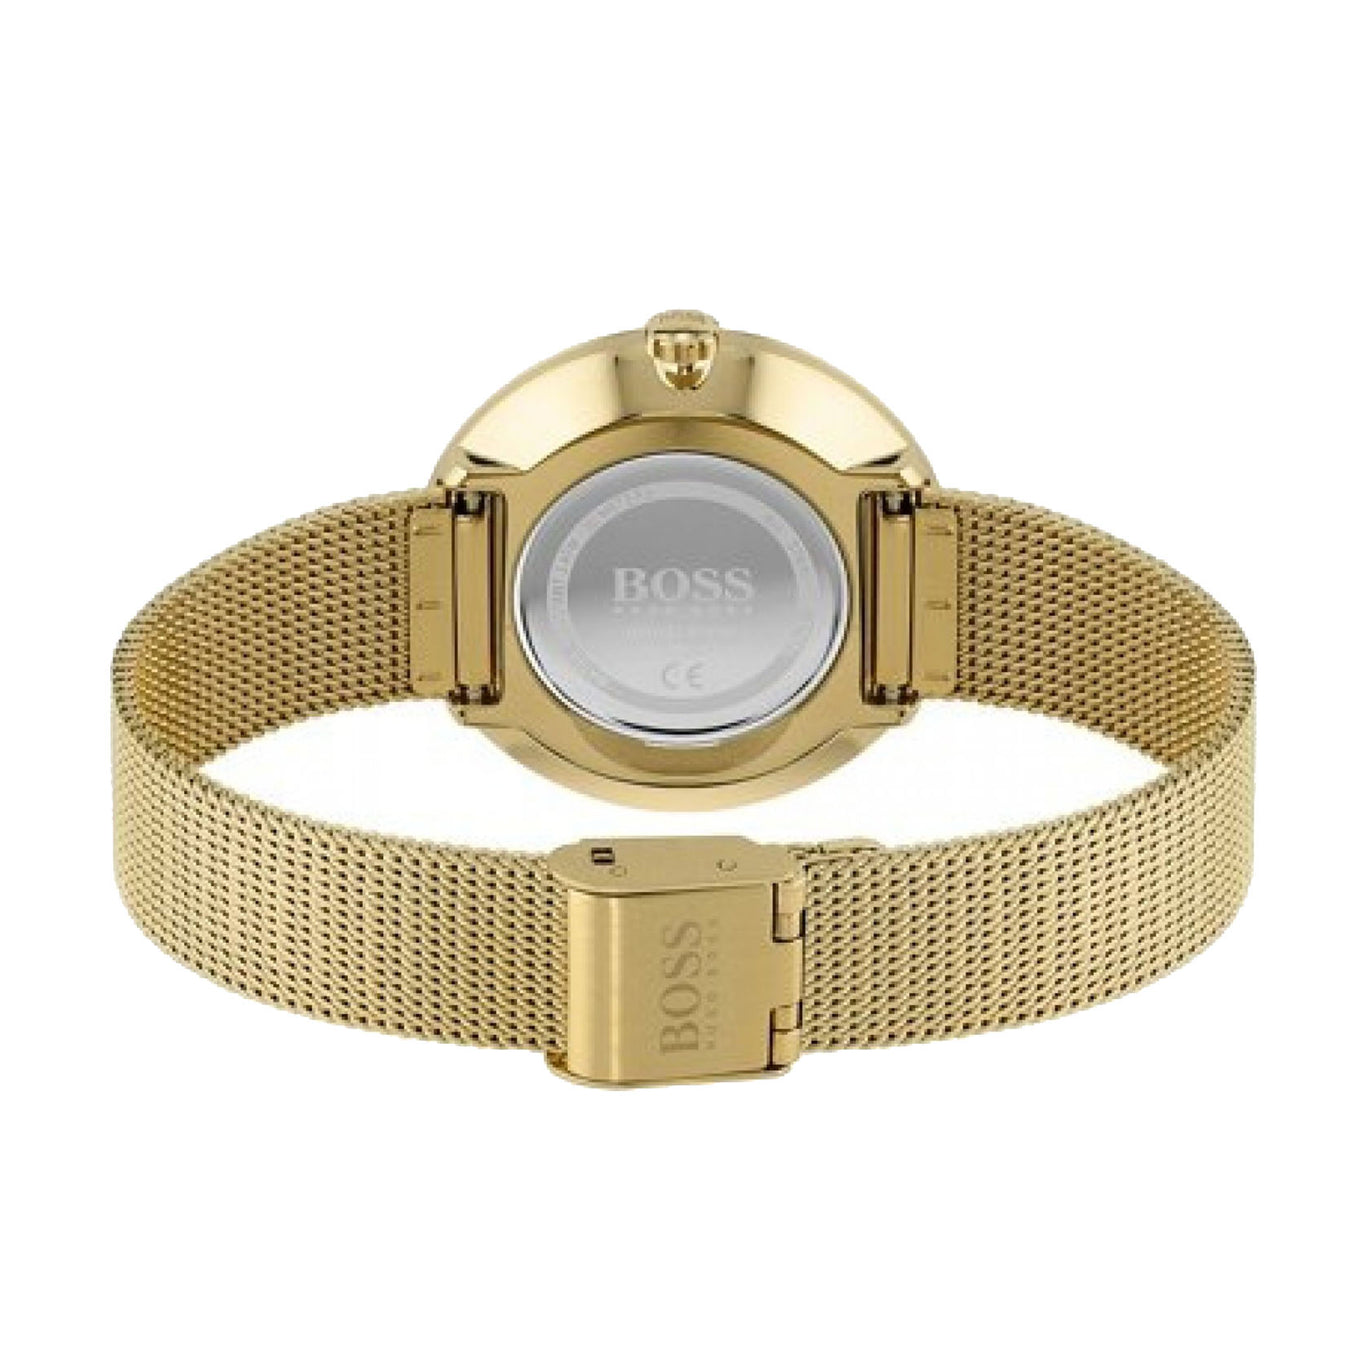 Boss Ladies Praise Crystal trimmed Yellow Gold watch